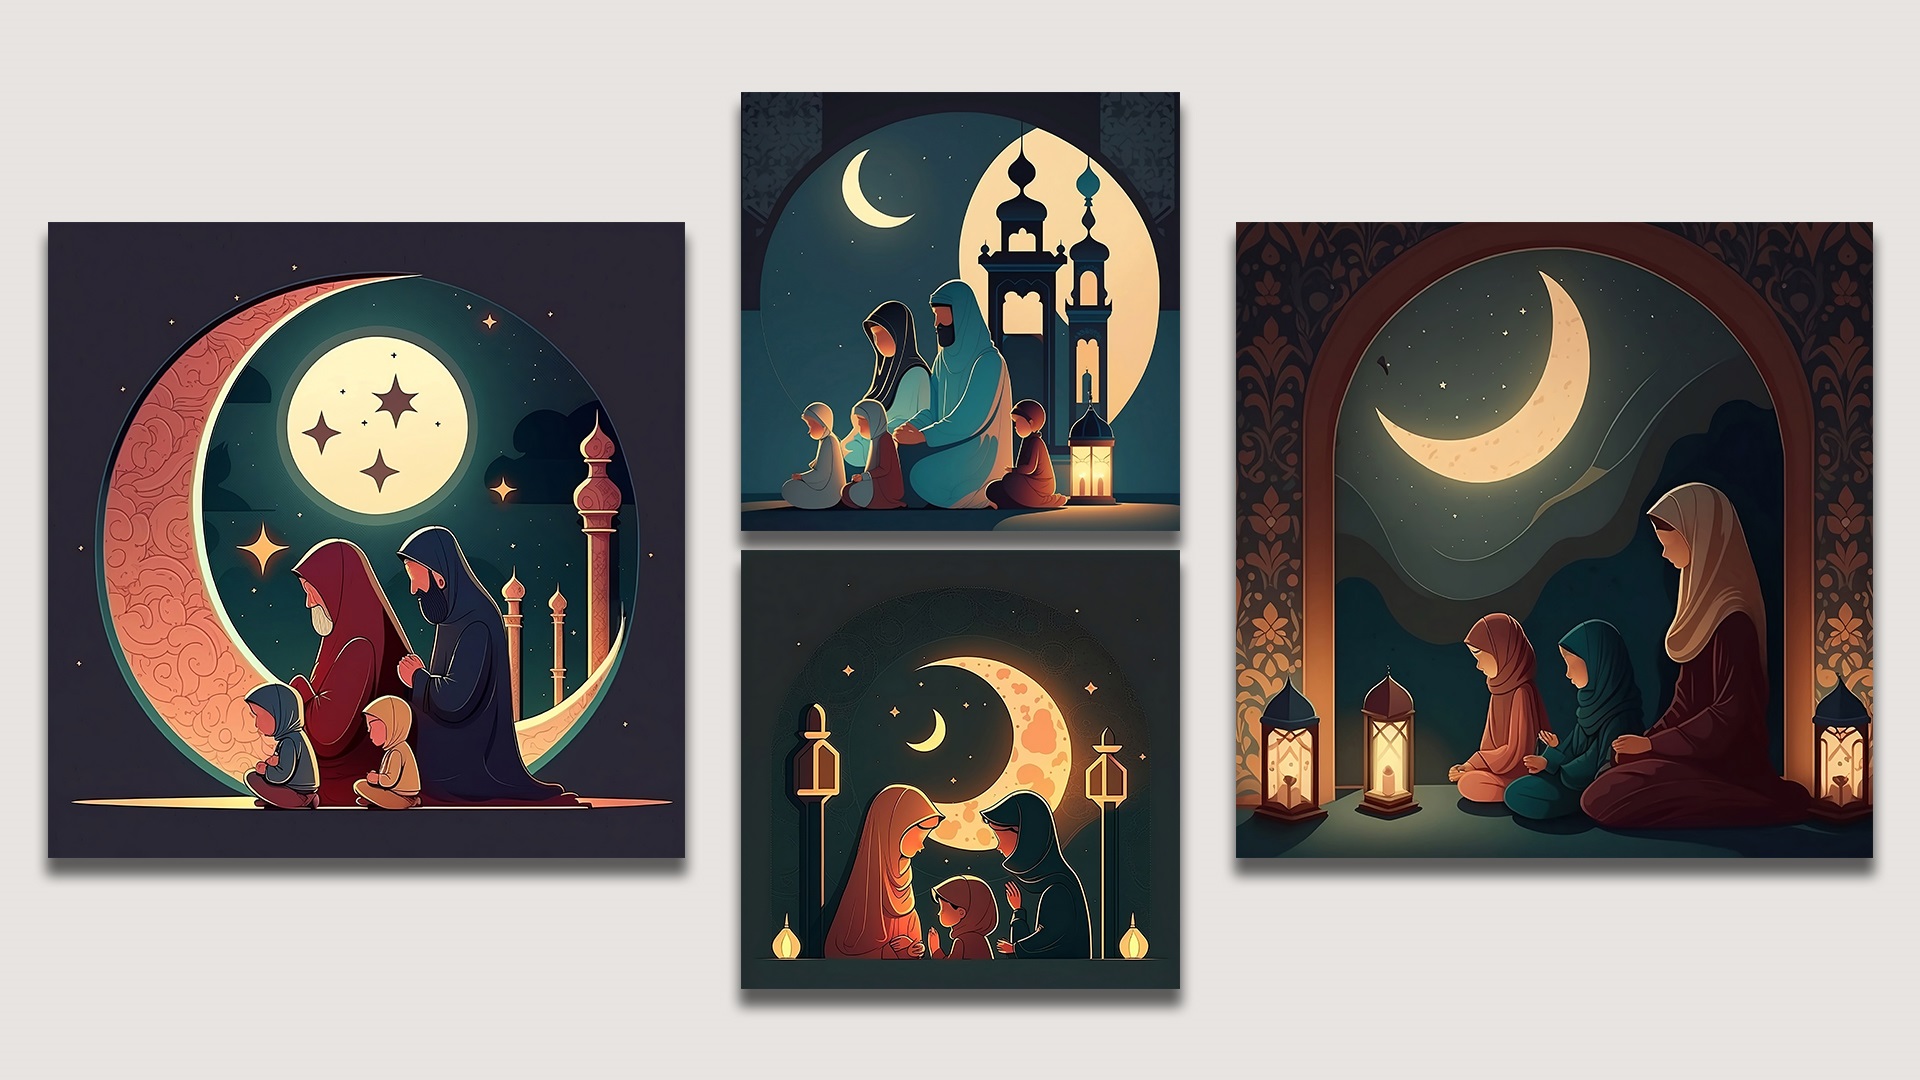 Set of three pictures of a nativity scene.